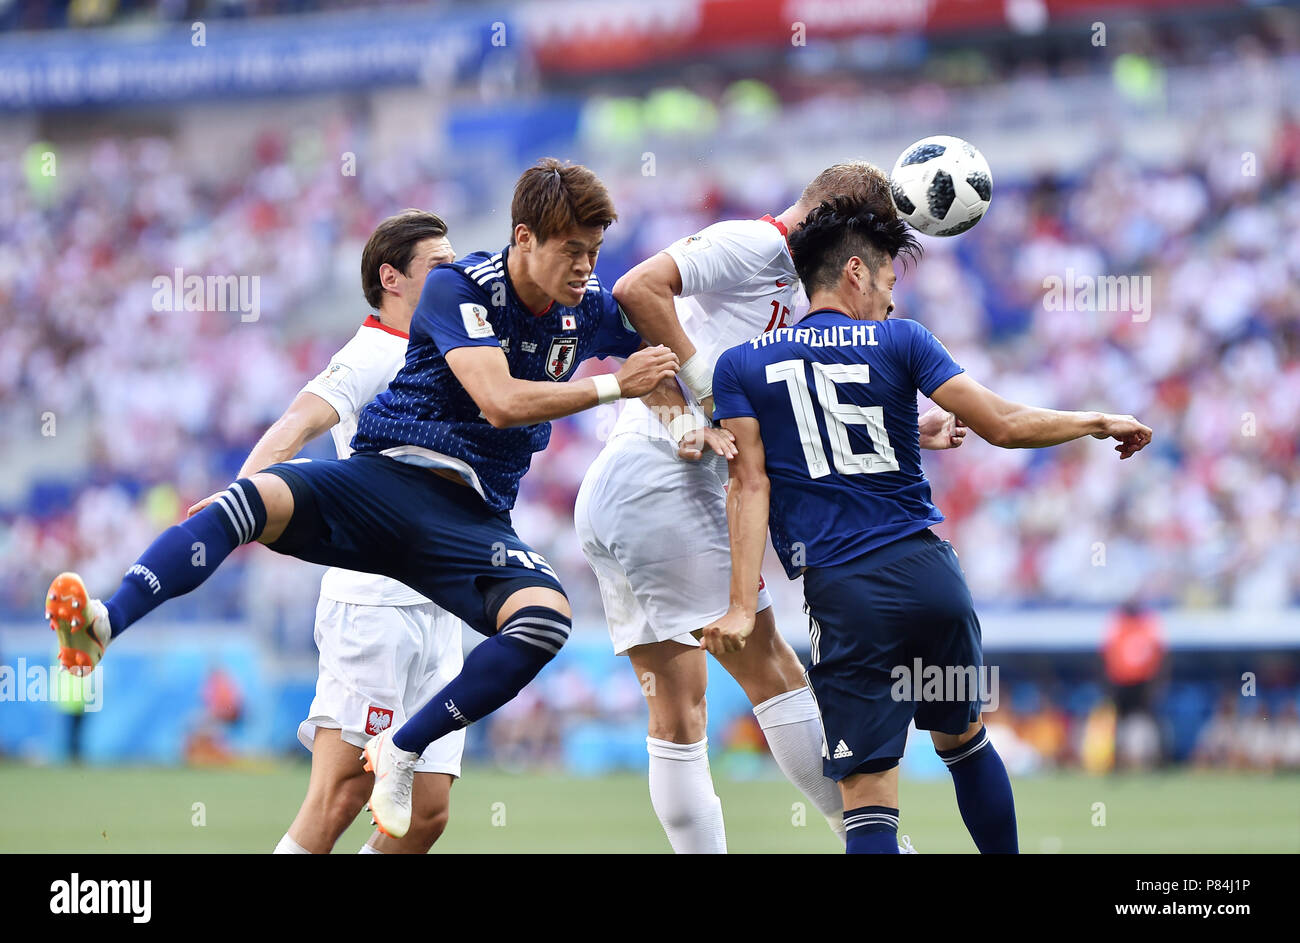 VOLGOGRAD, RUSSIA - JUNE 28: Yuya Osako and Hotaru Yamaguchi of Japan competes with Kamil Glik of Poland during the 2018 FIFA World Cup Russia group H match between Japan and Poland at Volgograd Arena on June 28, 2018 in Volgograd, Russia. (Photo by Lukasz Laskowski/PressFocus/MB Media/) Stock Photo